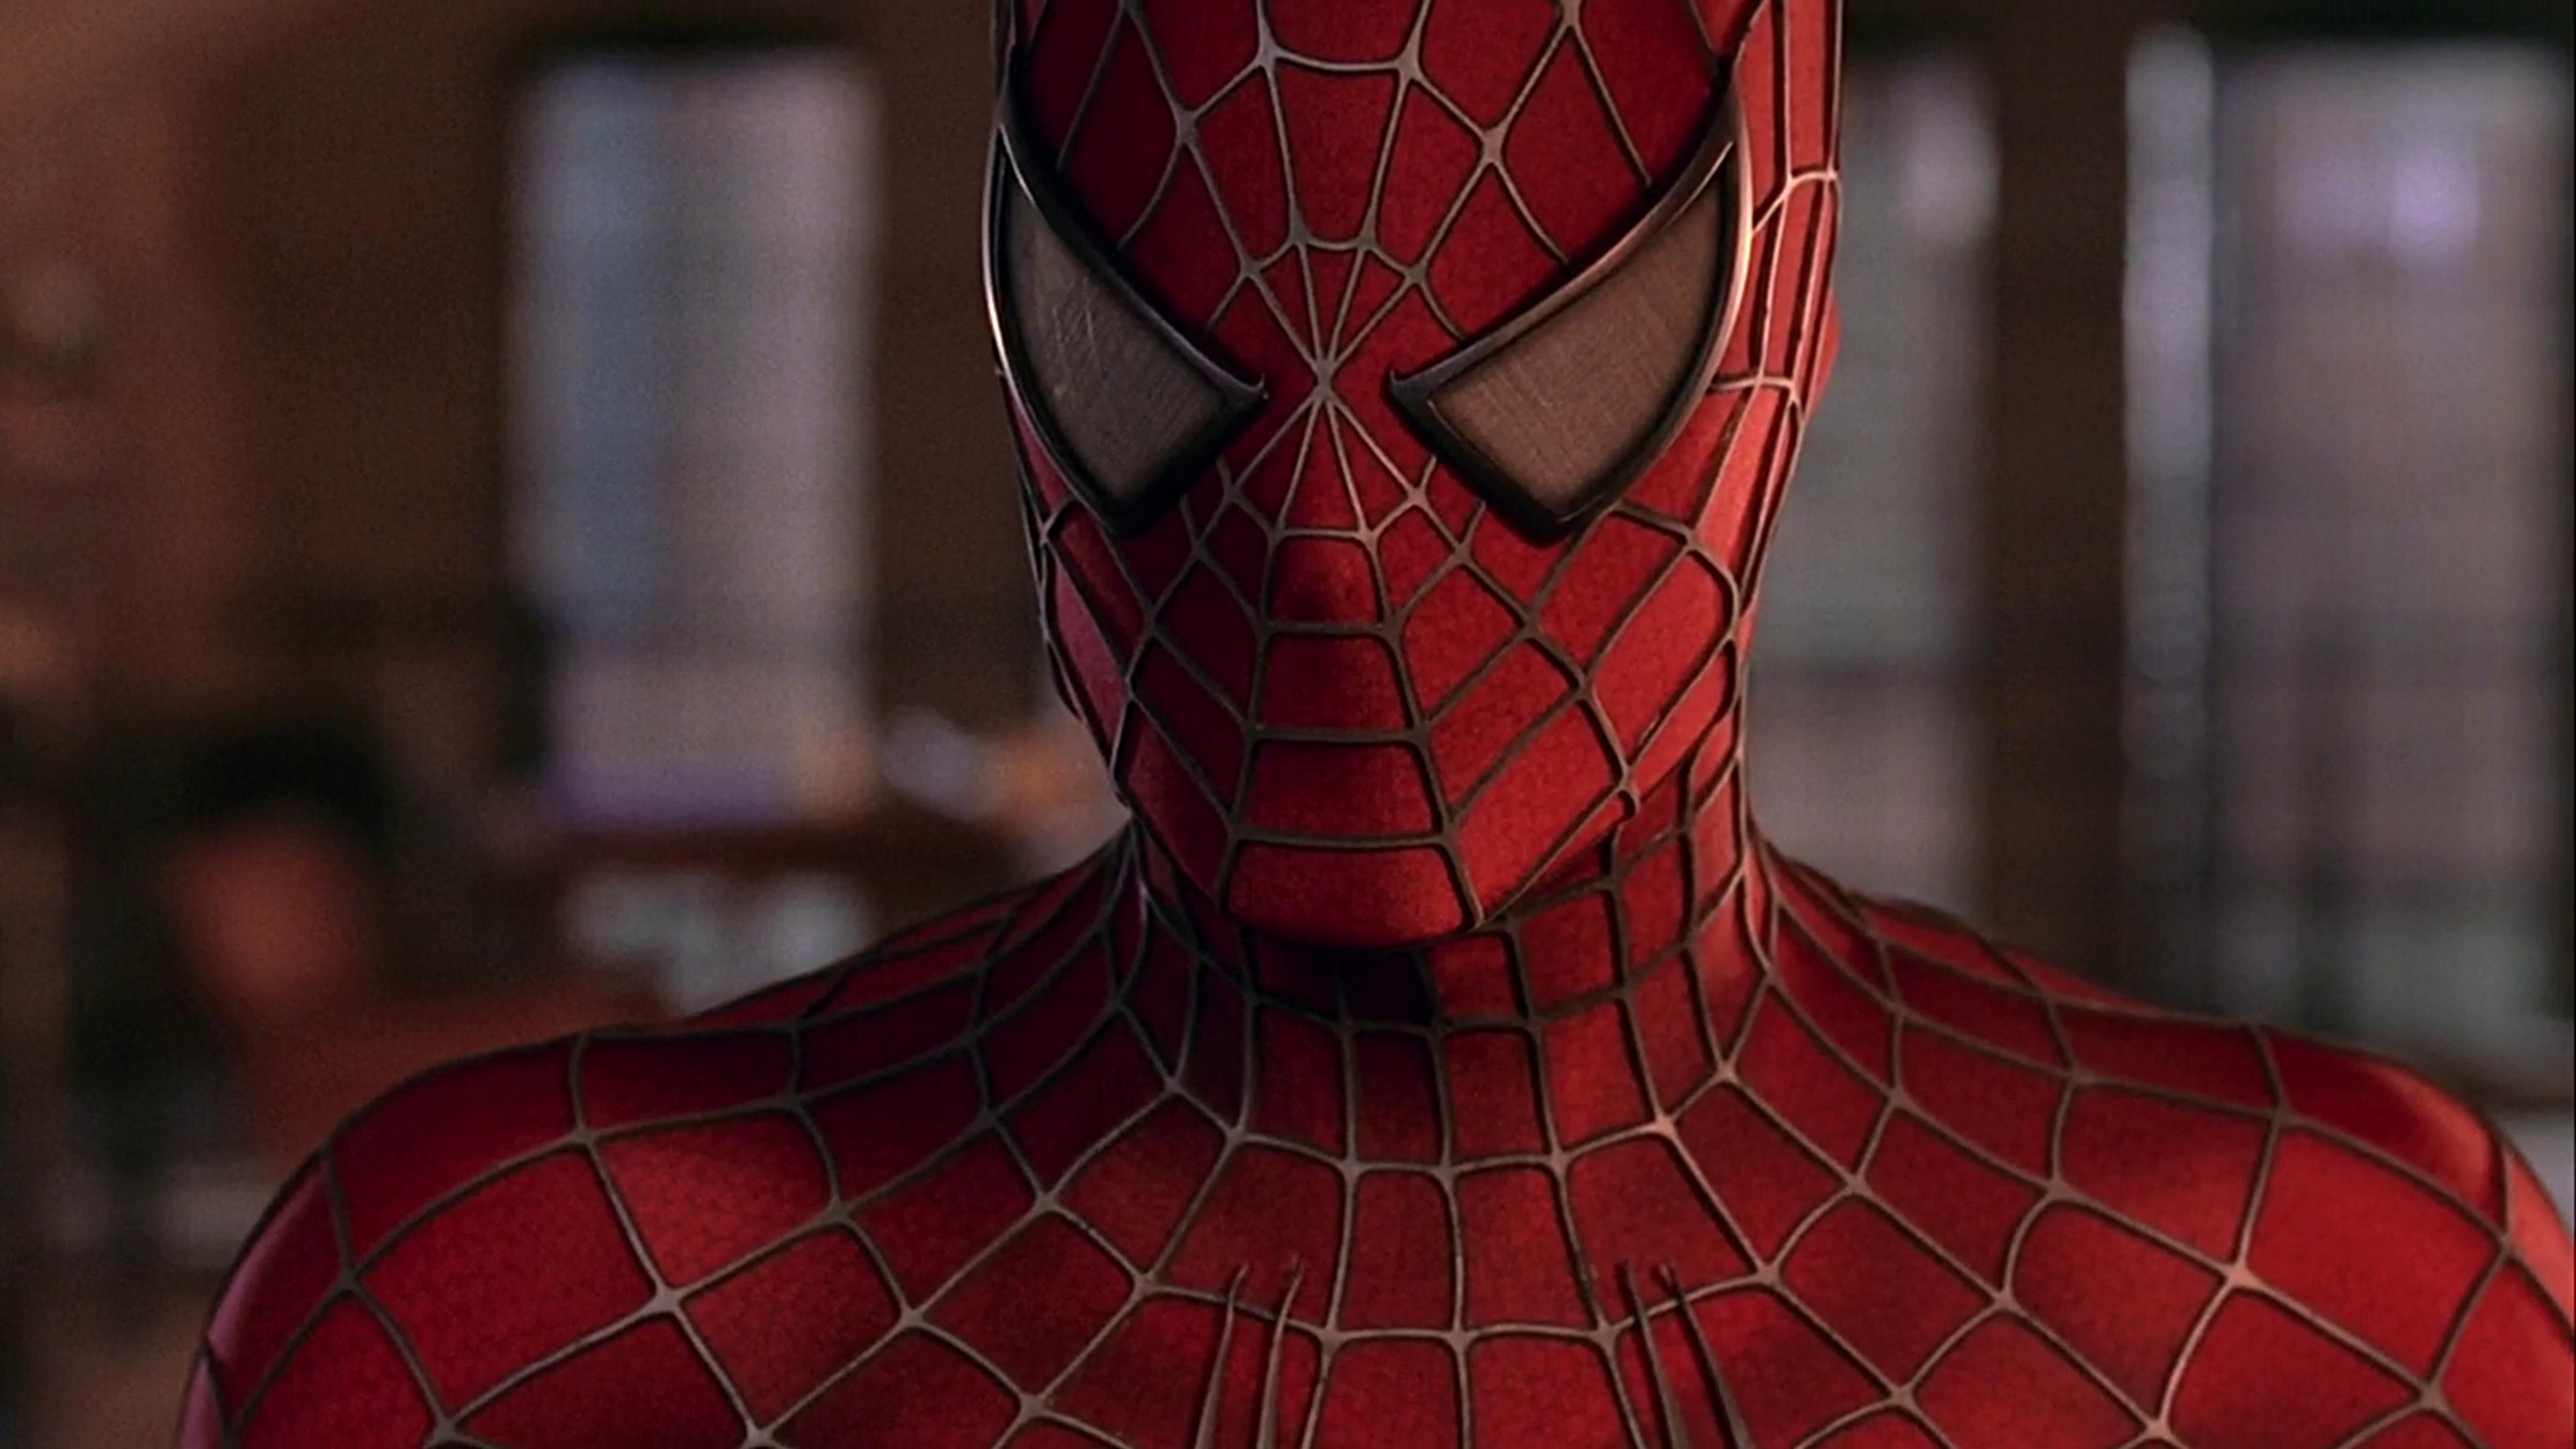 I got nostalgic and made wallpapers out of the Tobey Maguire trilogy.